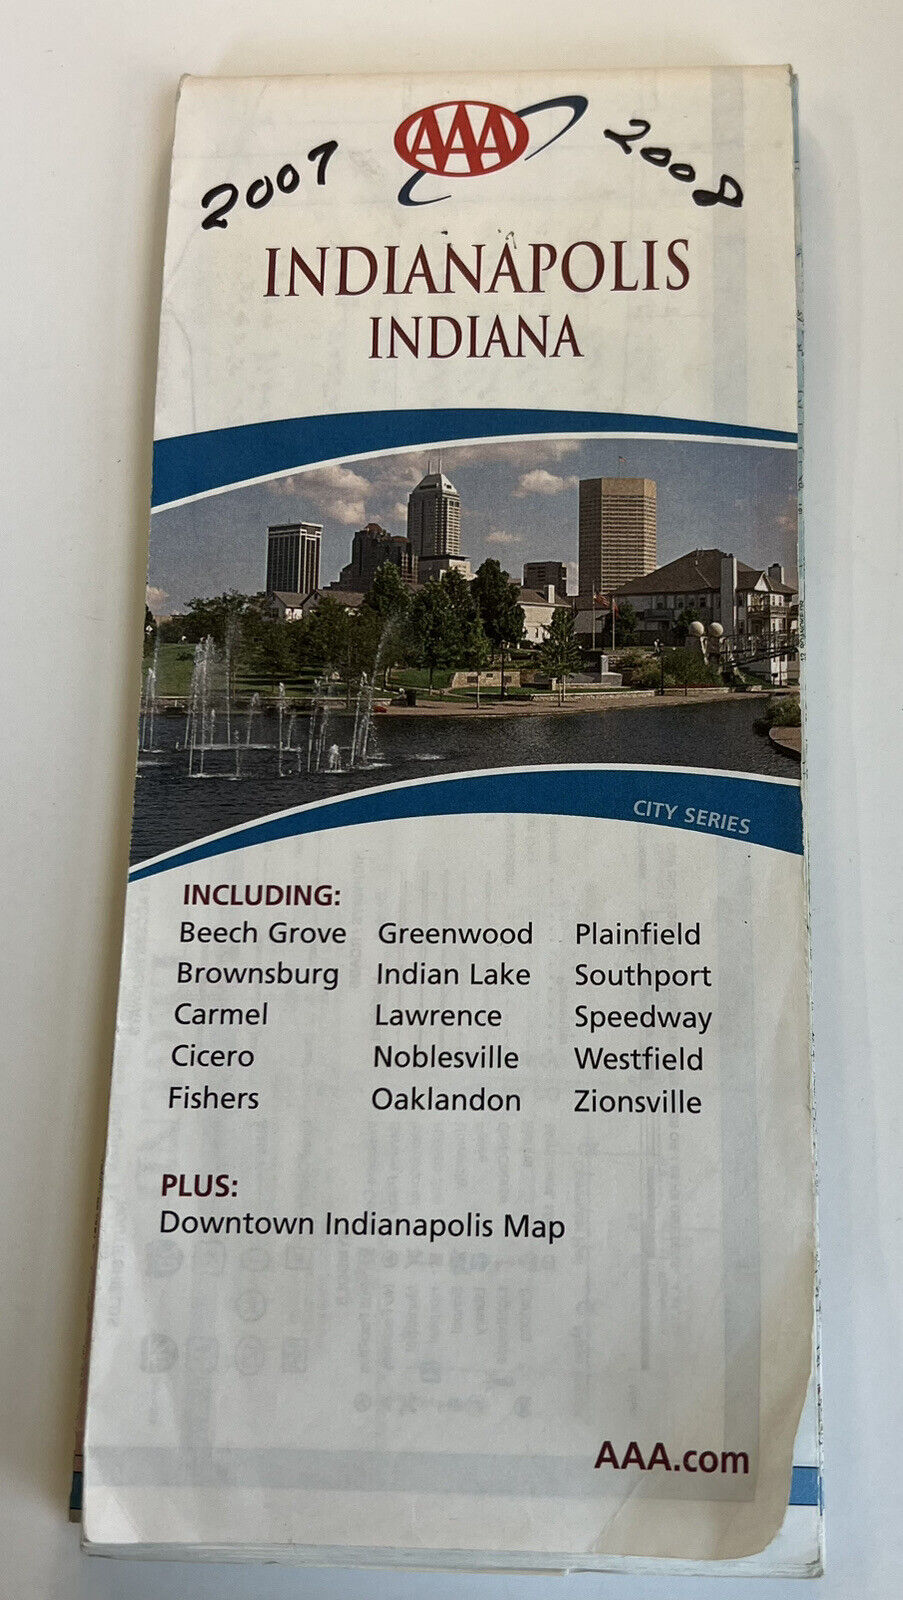 AAA Indianapolis, Indiana  City Series Road/ Highway/ Travel Map - 2007/2008